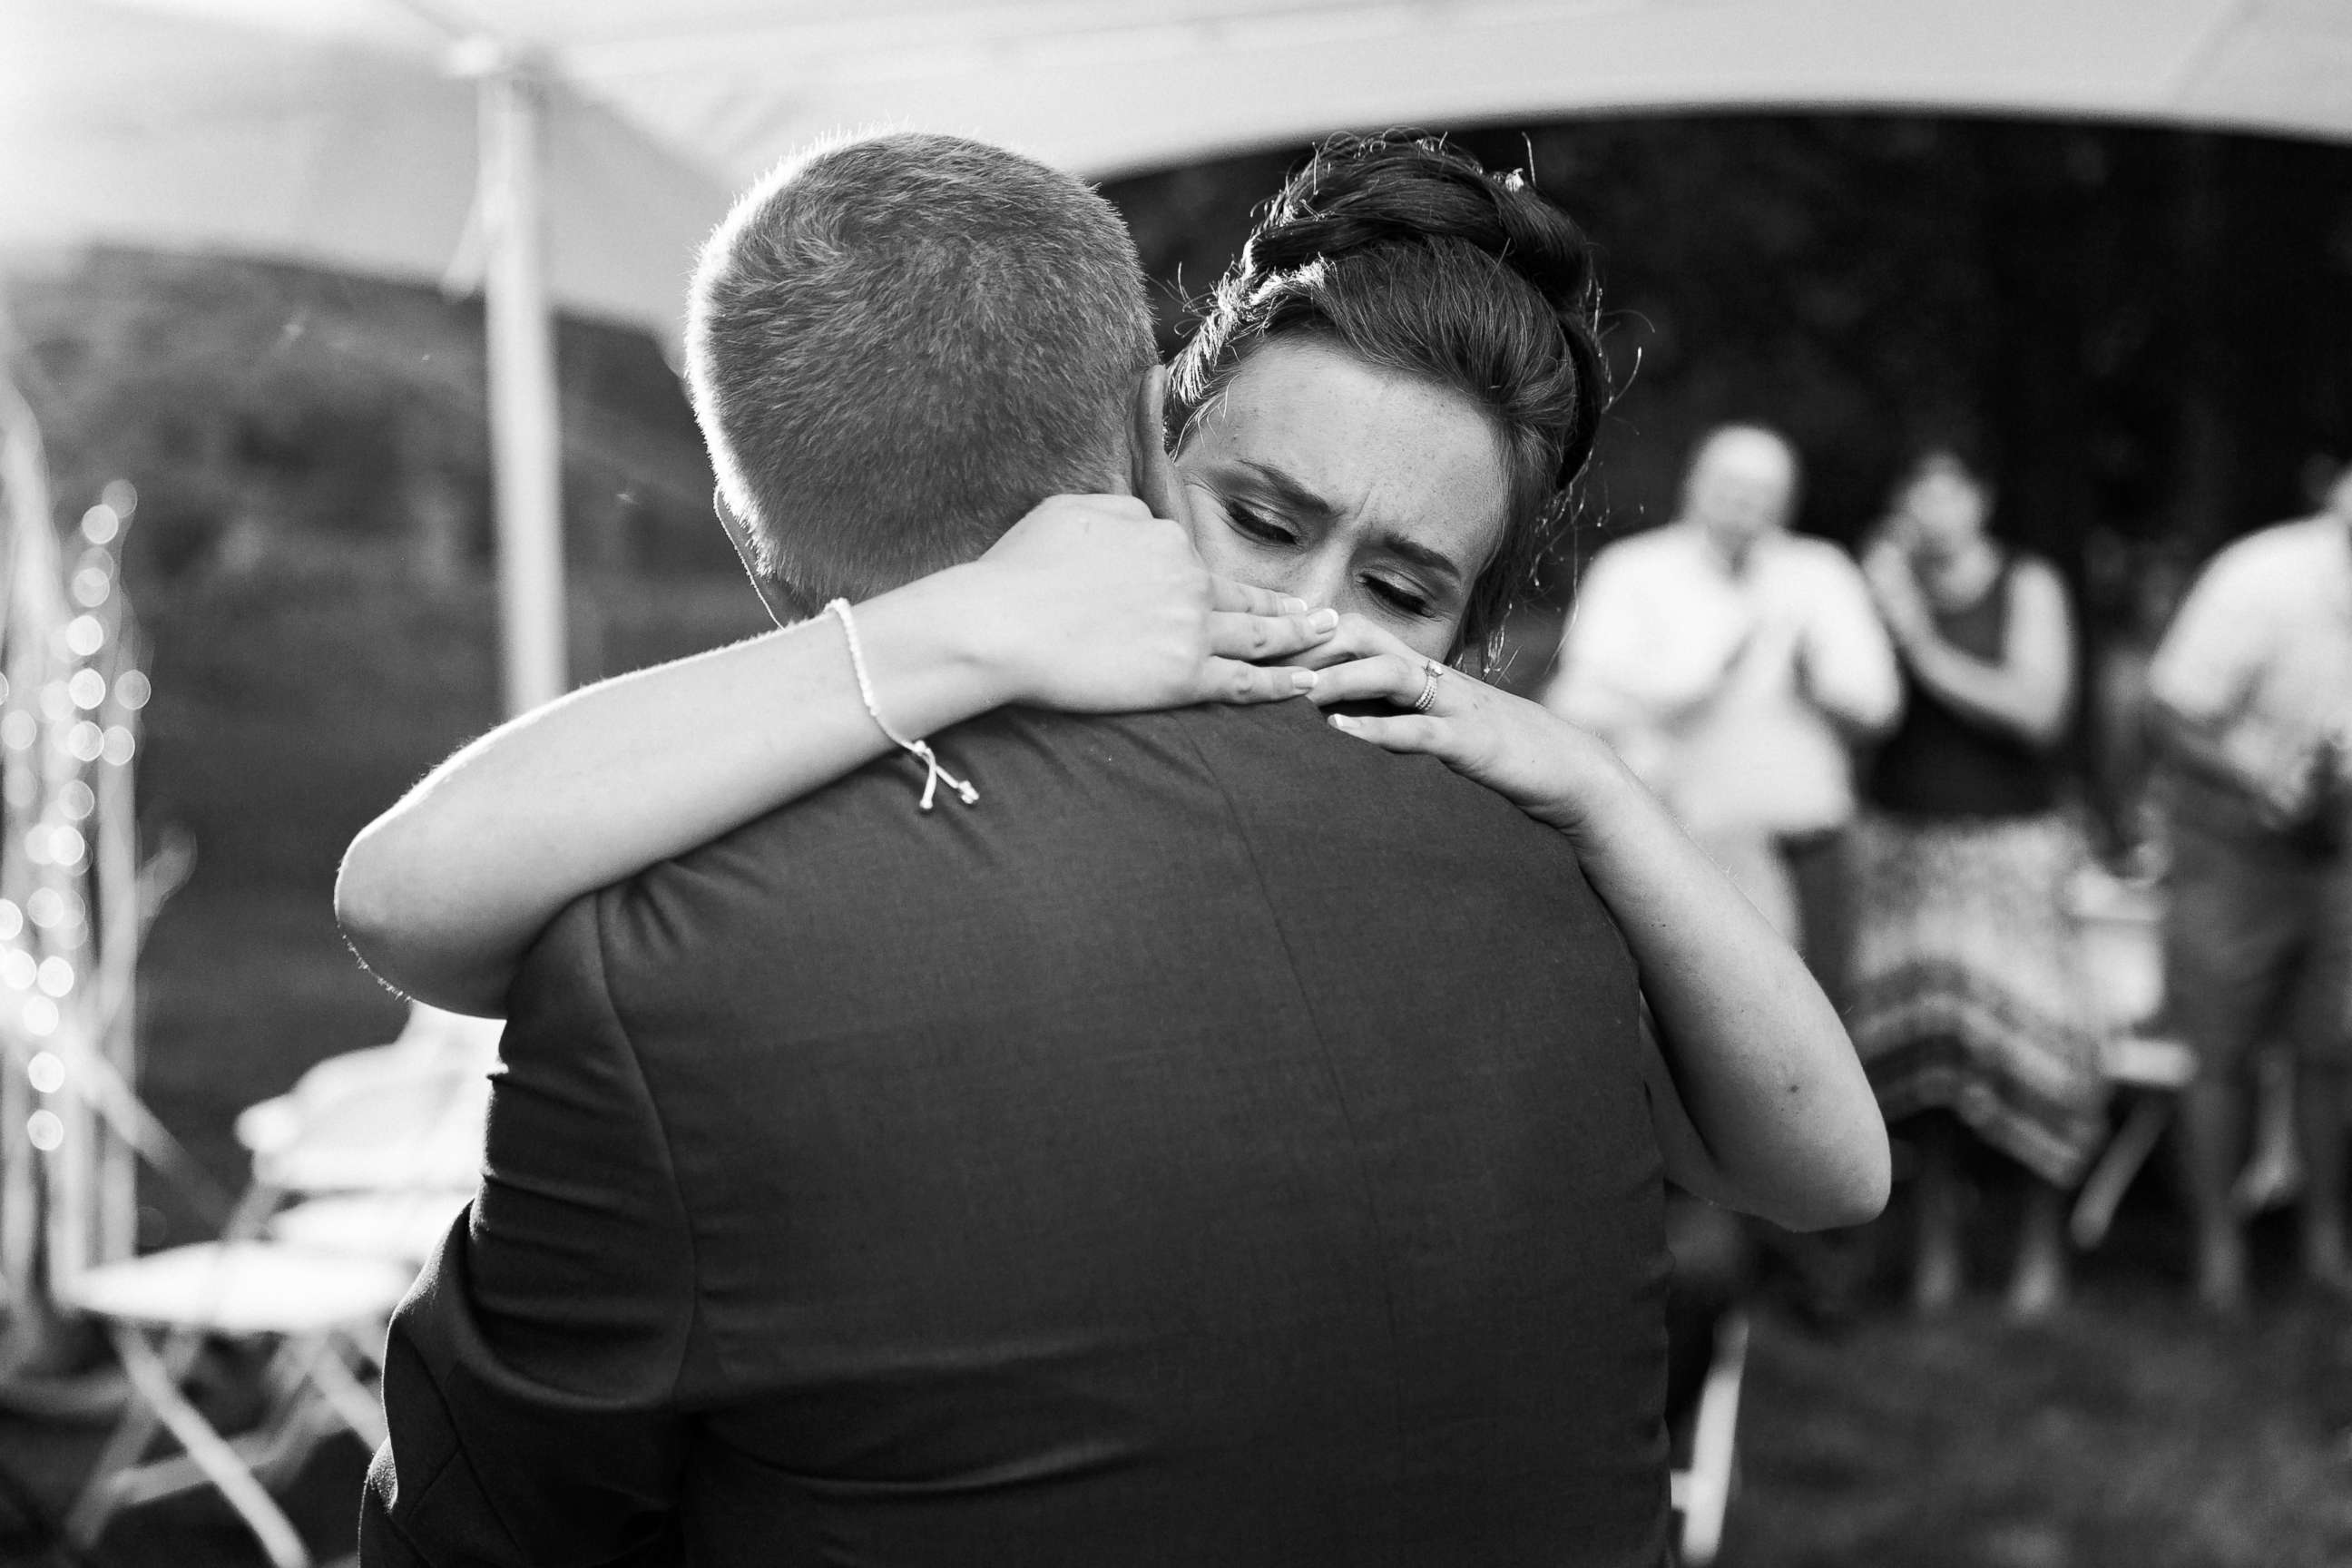 PHOTO: Dad Paul Fick gave his daughter a big hug after they finished their father-daughter dance.